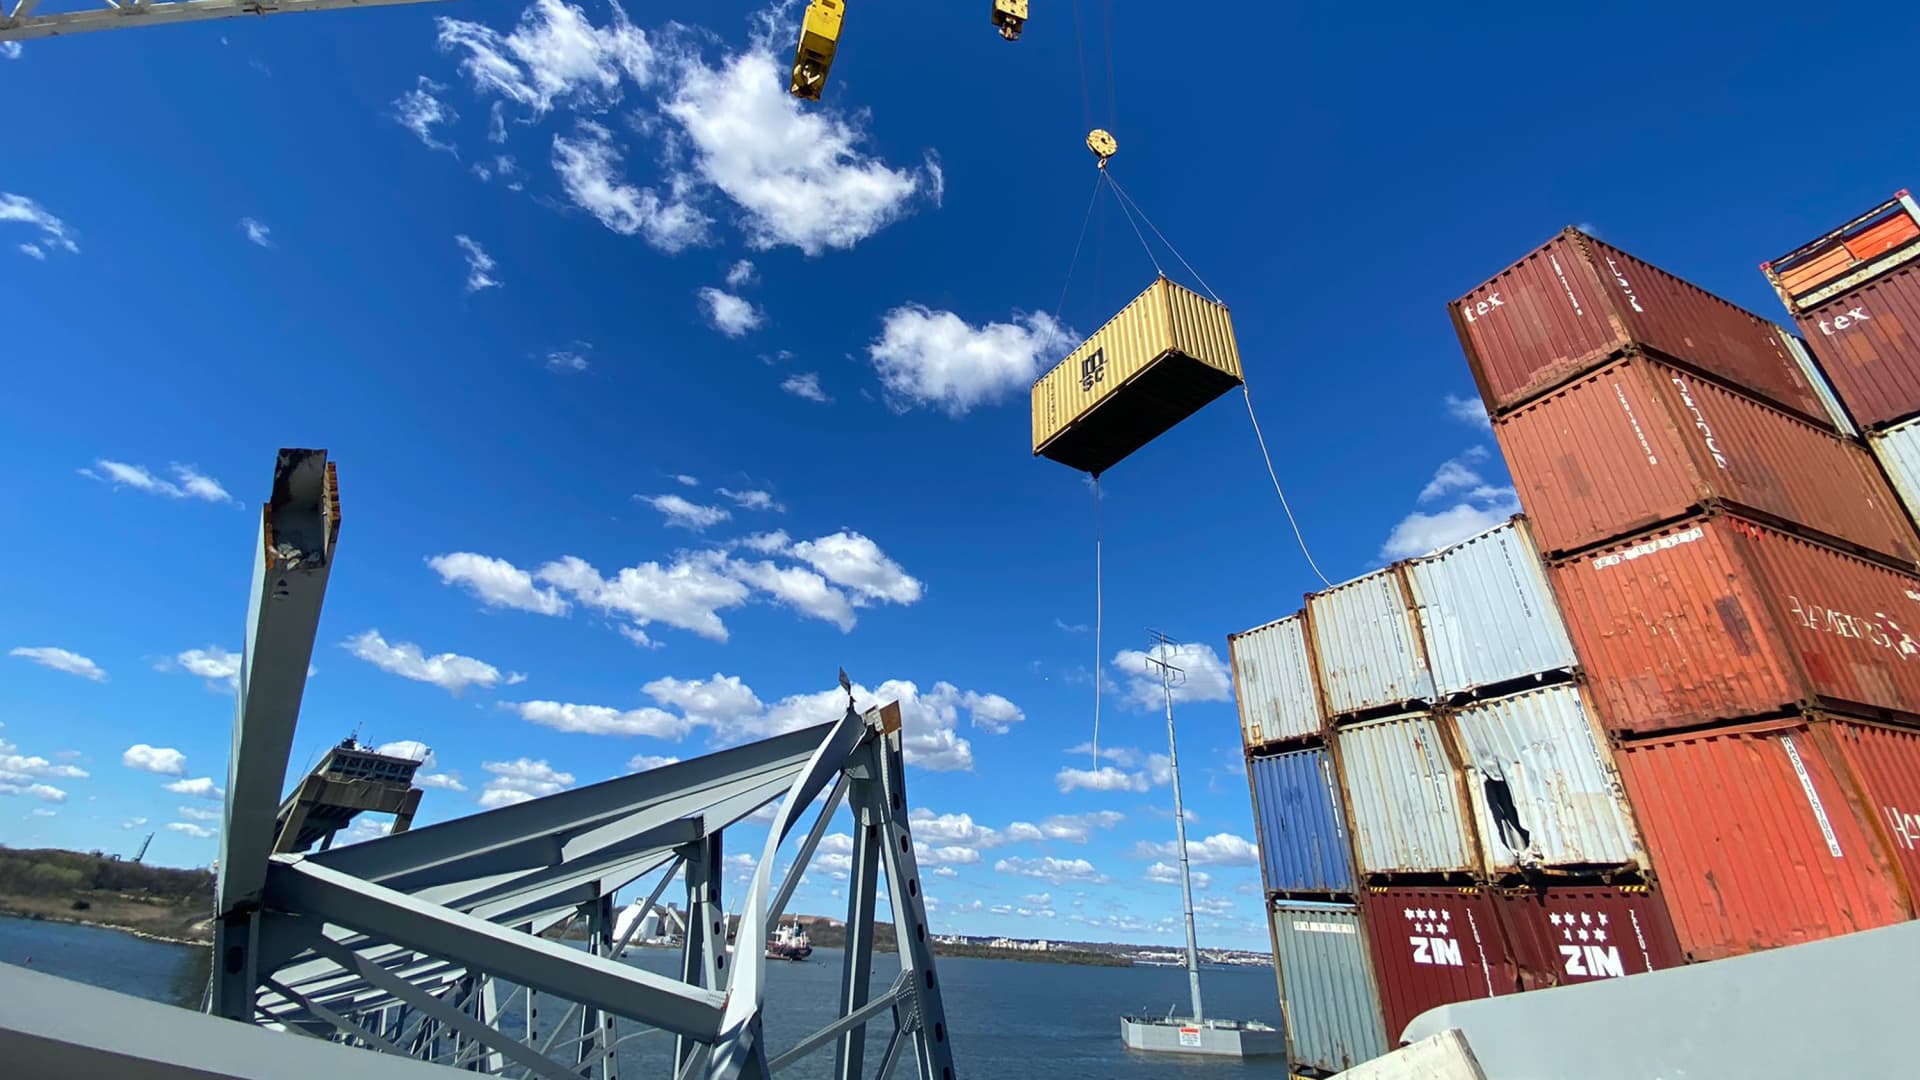 Dali container removal will take weeks, a key to Port of Baltimore reopening